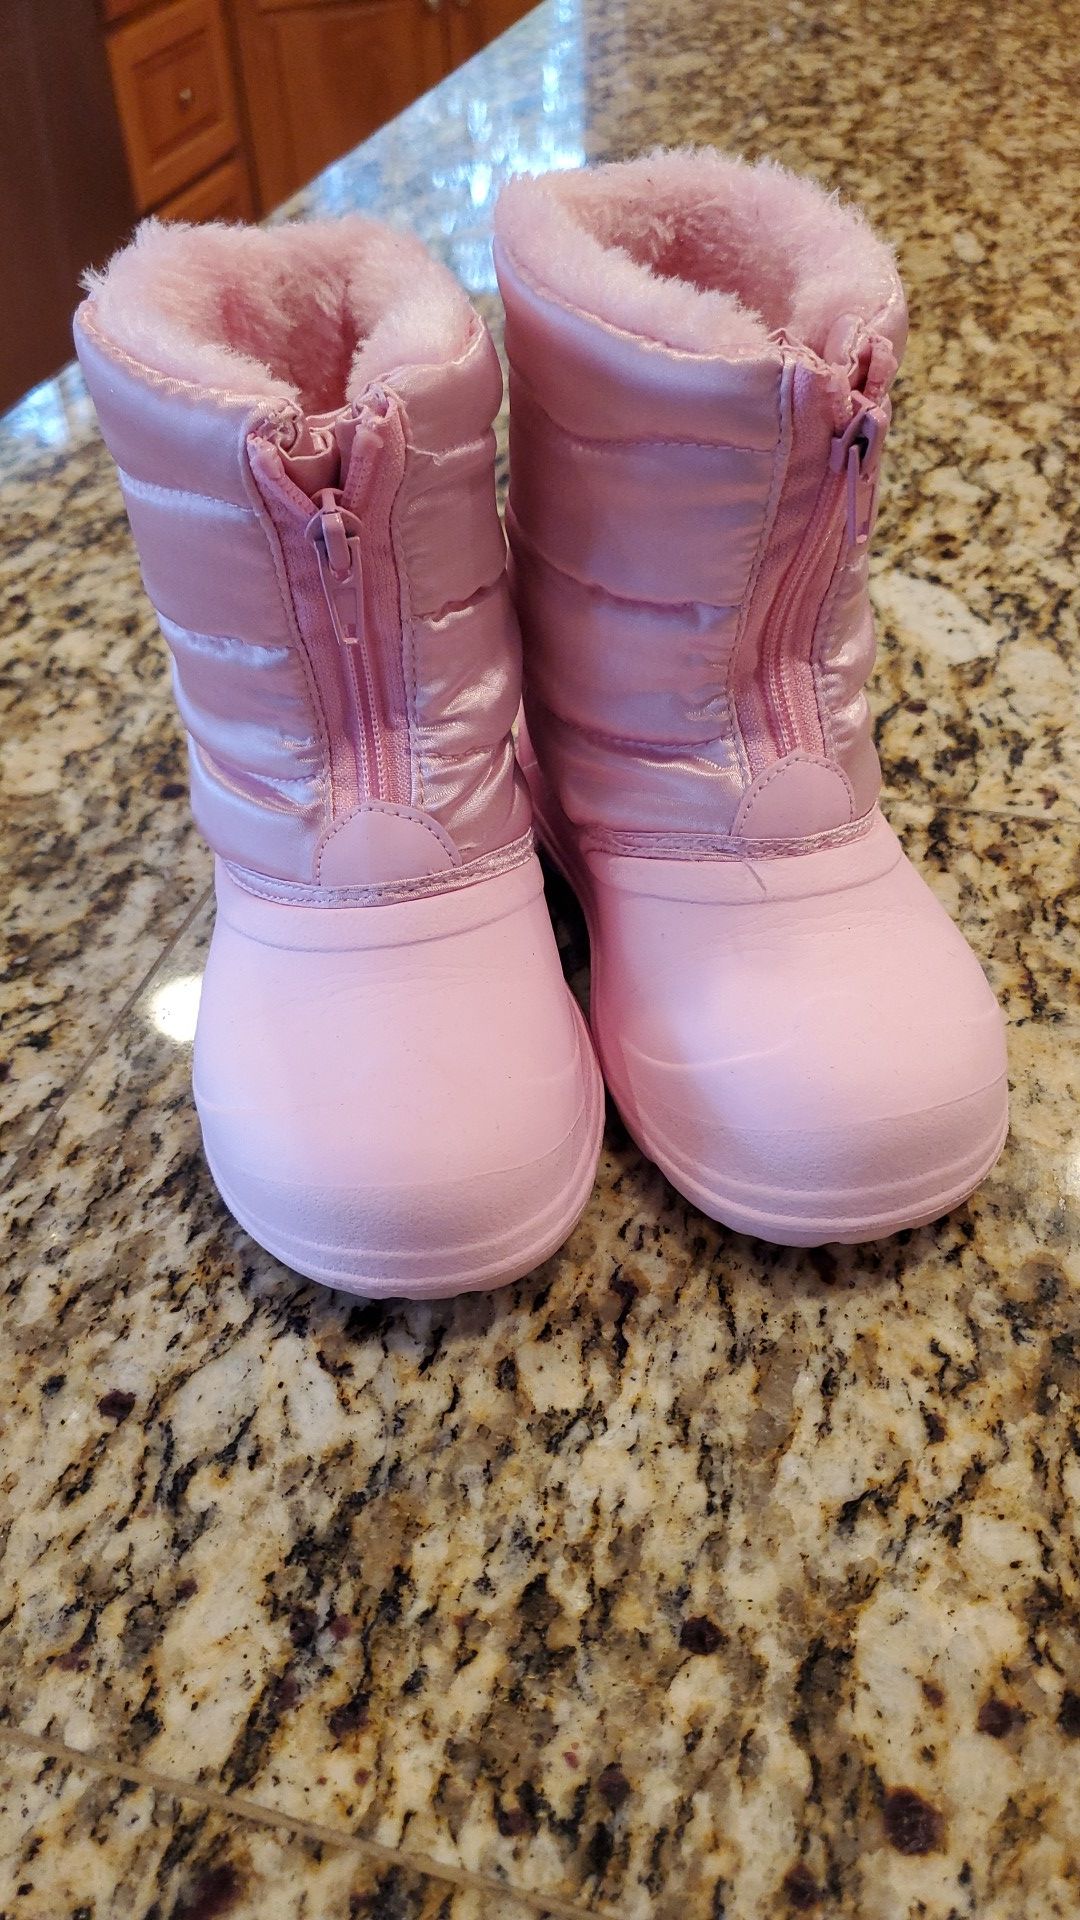 The doll maker pink toddler girl snow winter boots size 10